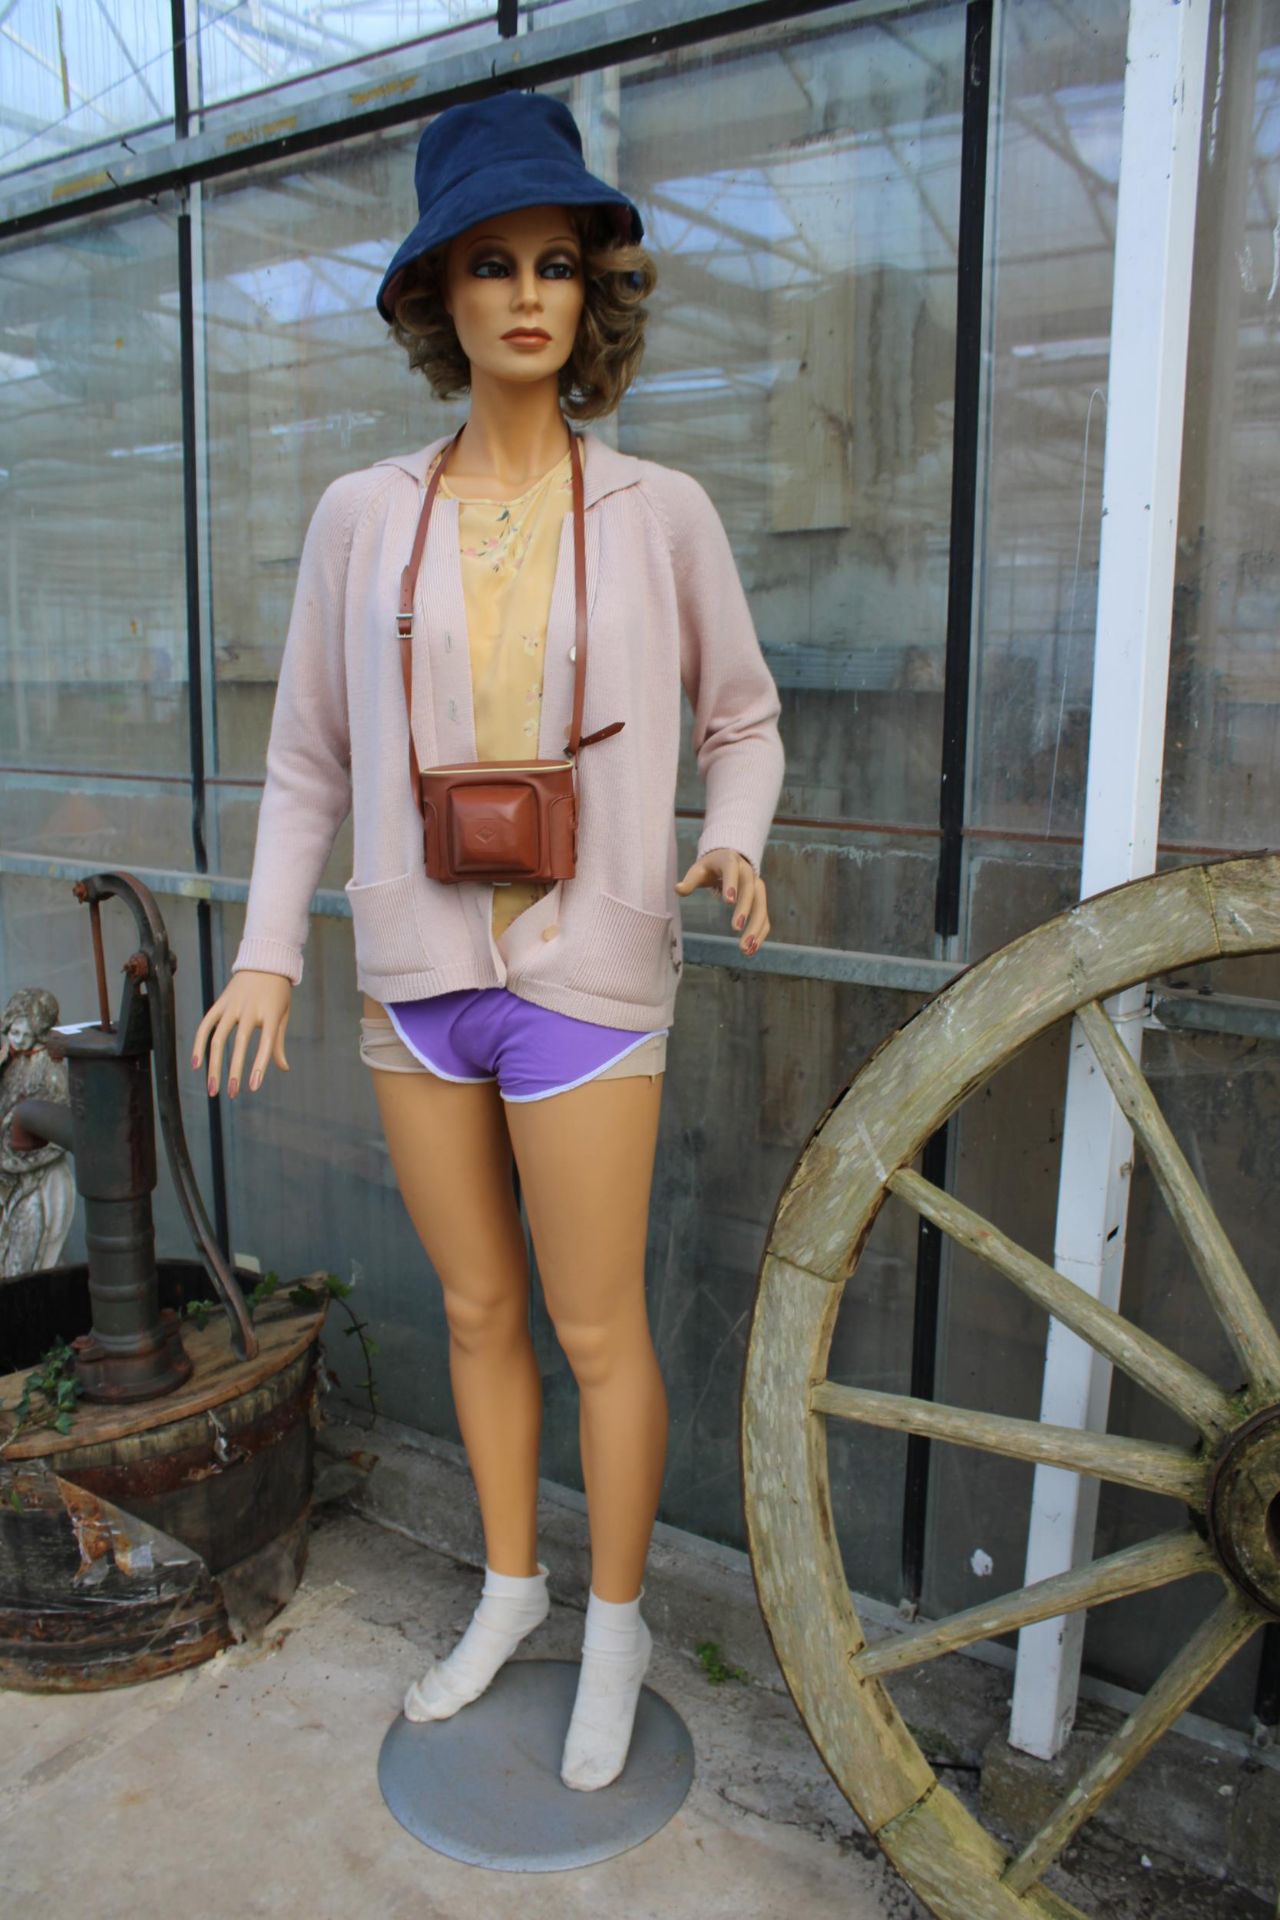 A FEMALE SHOP DISPLAY MANNEQUIN WITH STAND AND CLOTHING